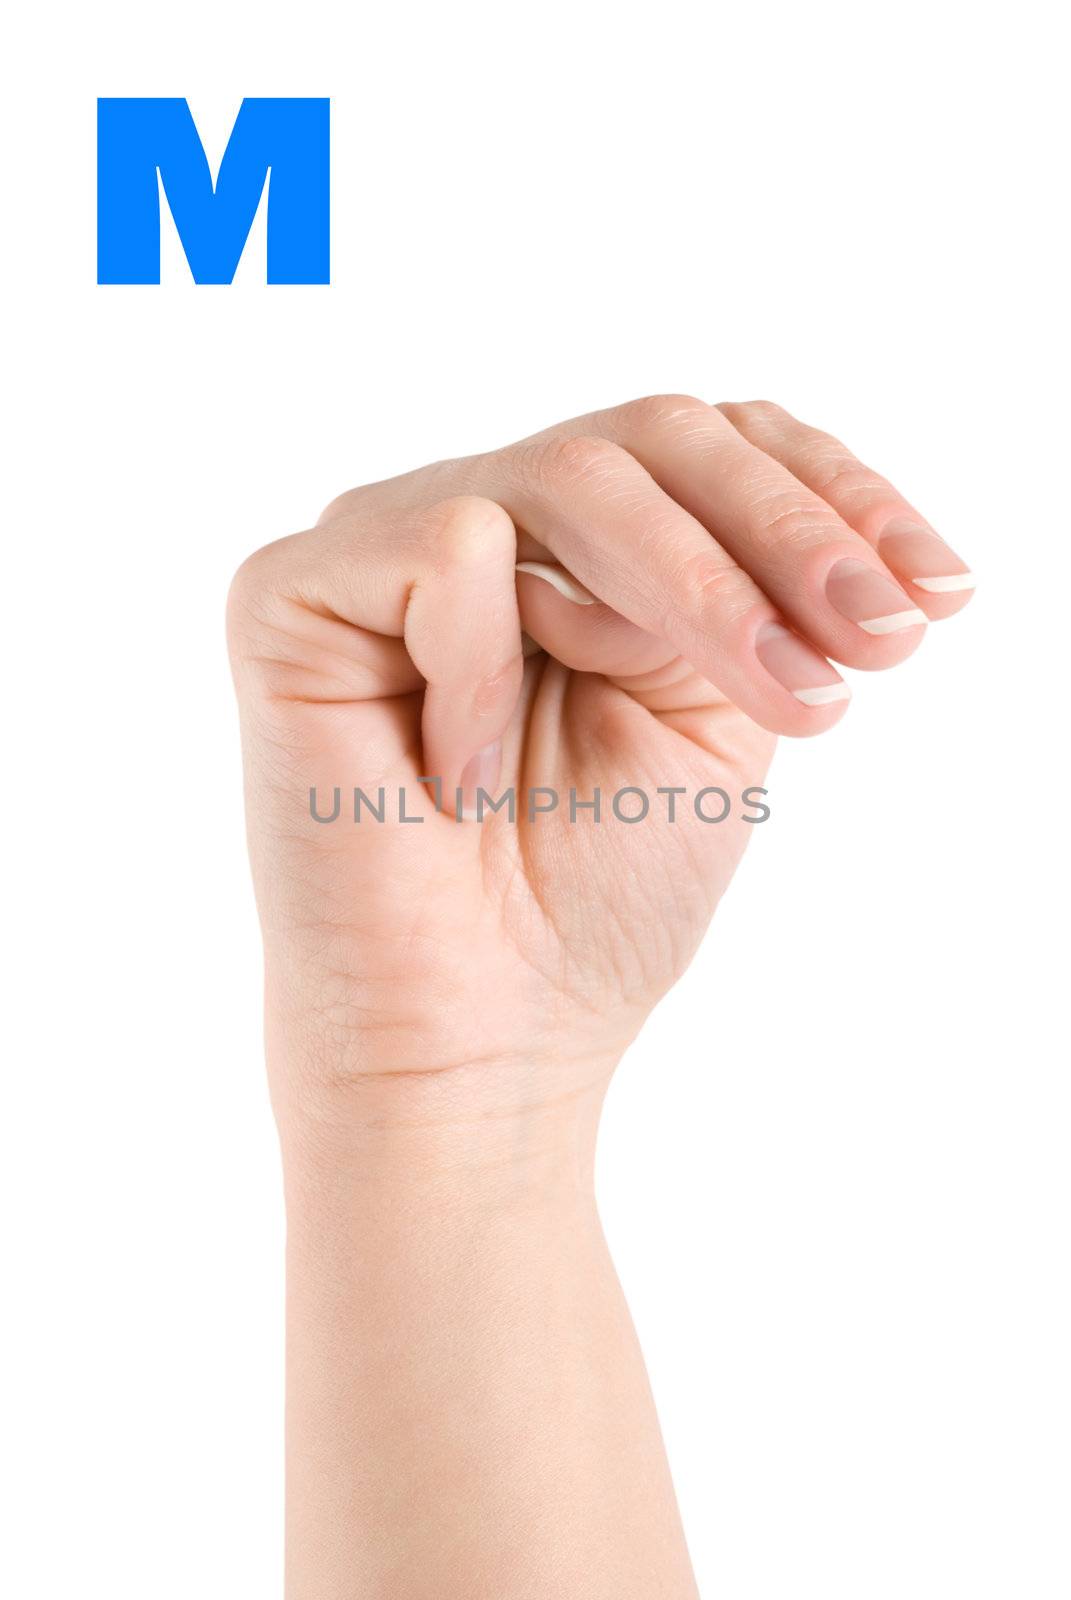 Finger Spelling the Alphabet in American Sign Language (ASL). The Letter M